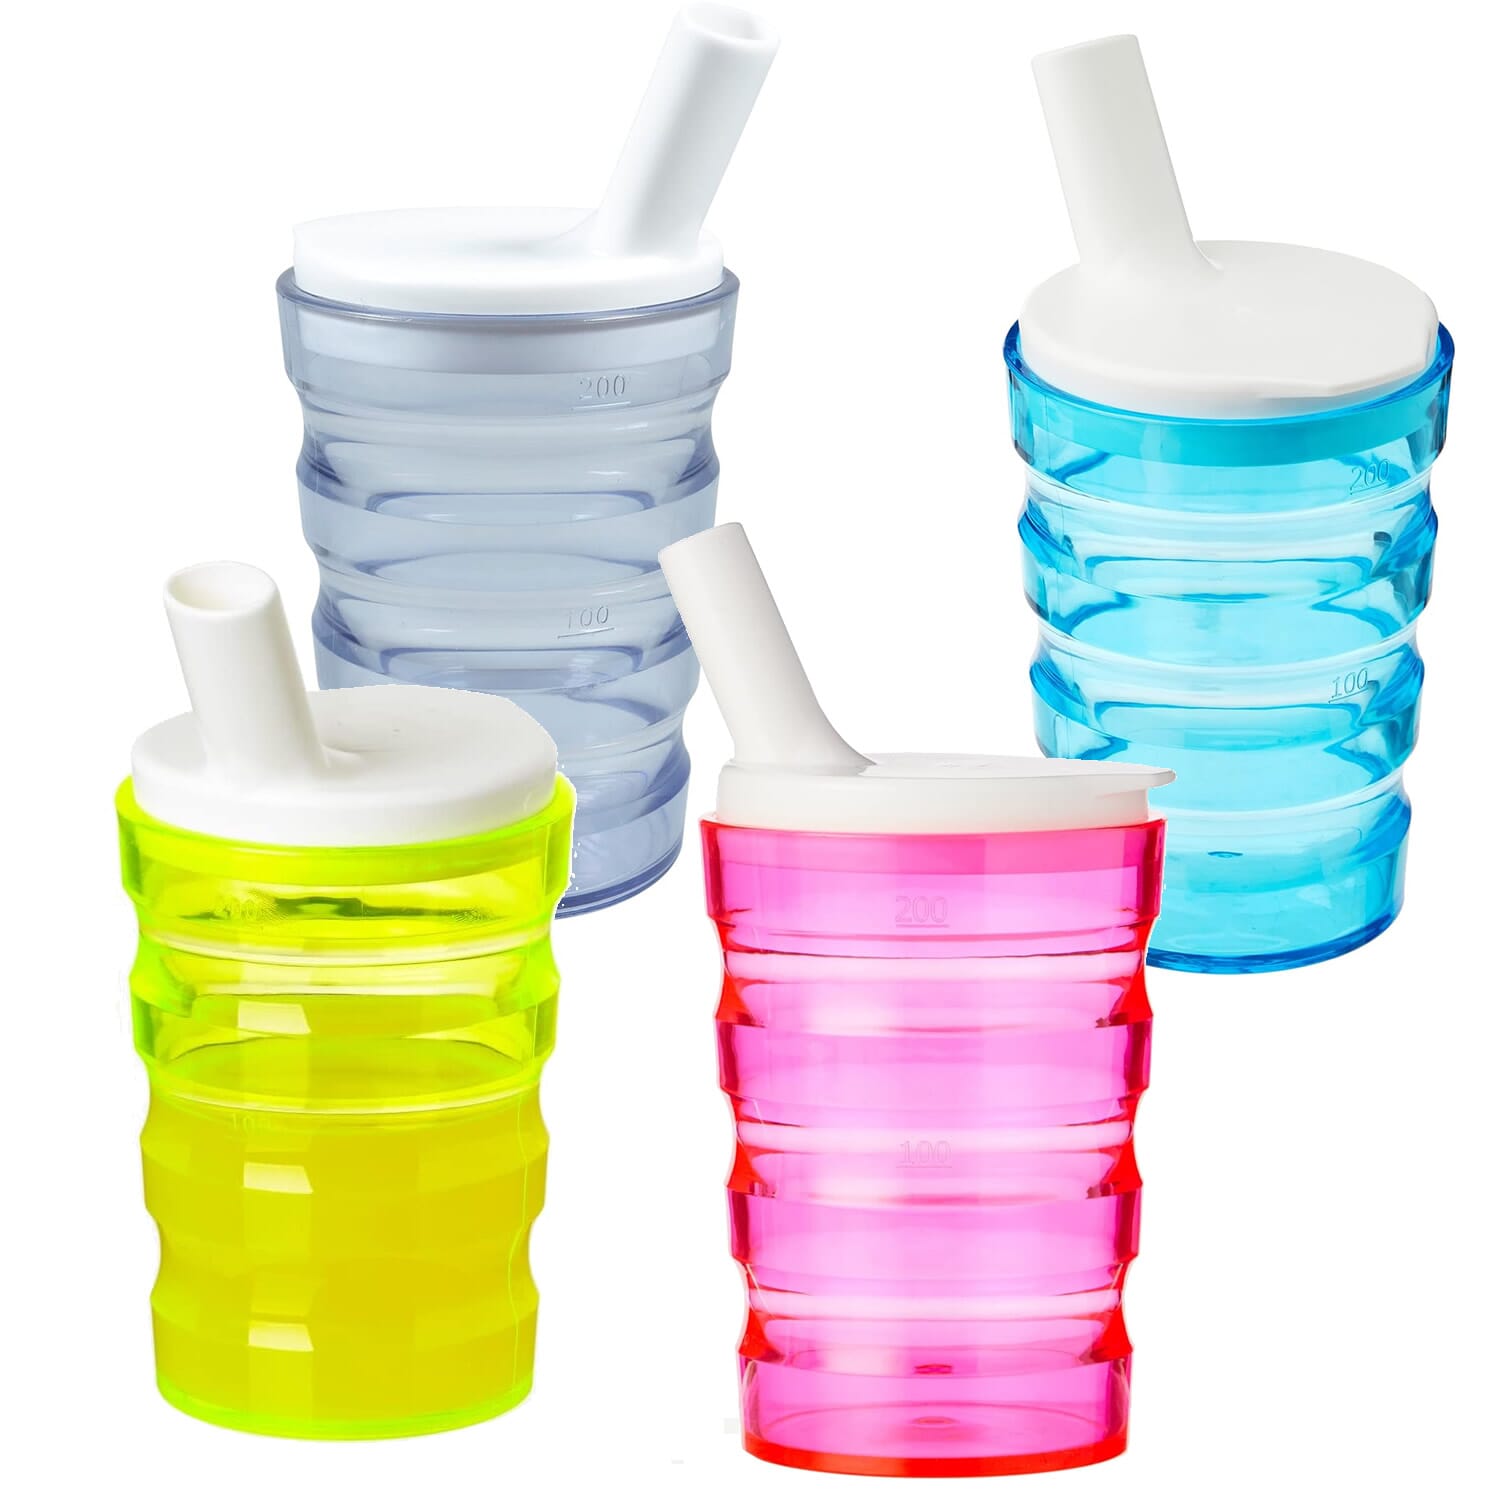 View Easy Grip Ribbed Beaker 200ml Pack of 4 Various Colours information